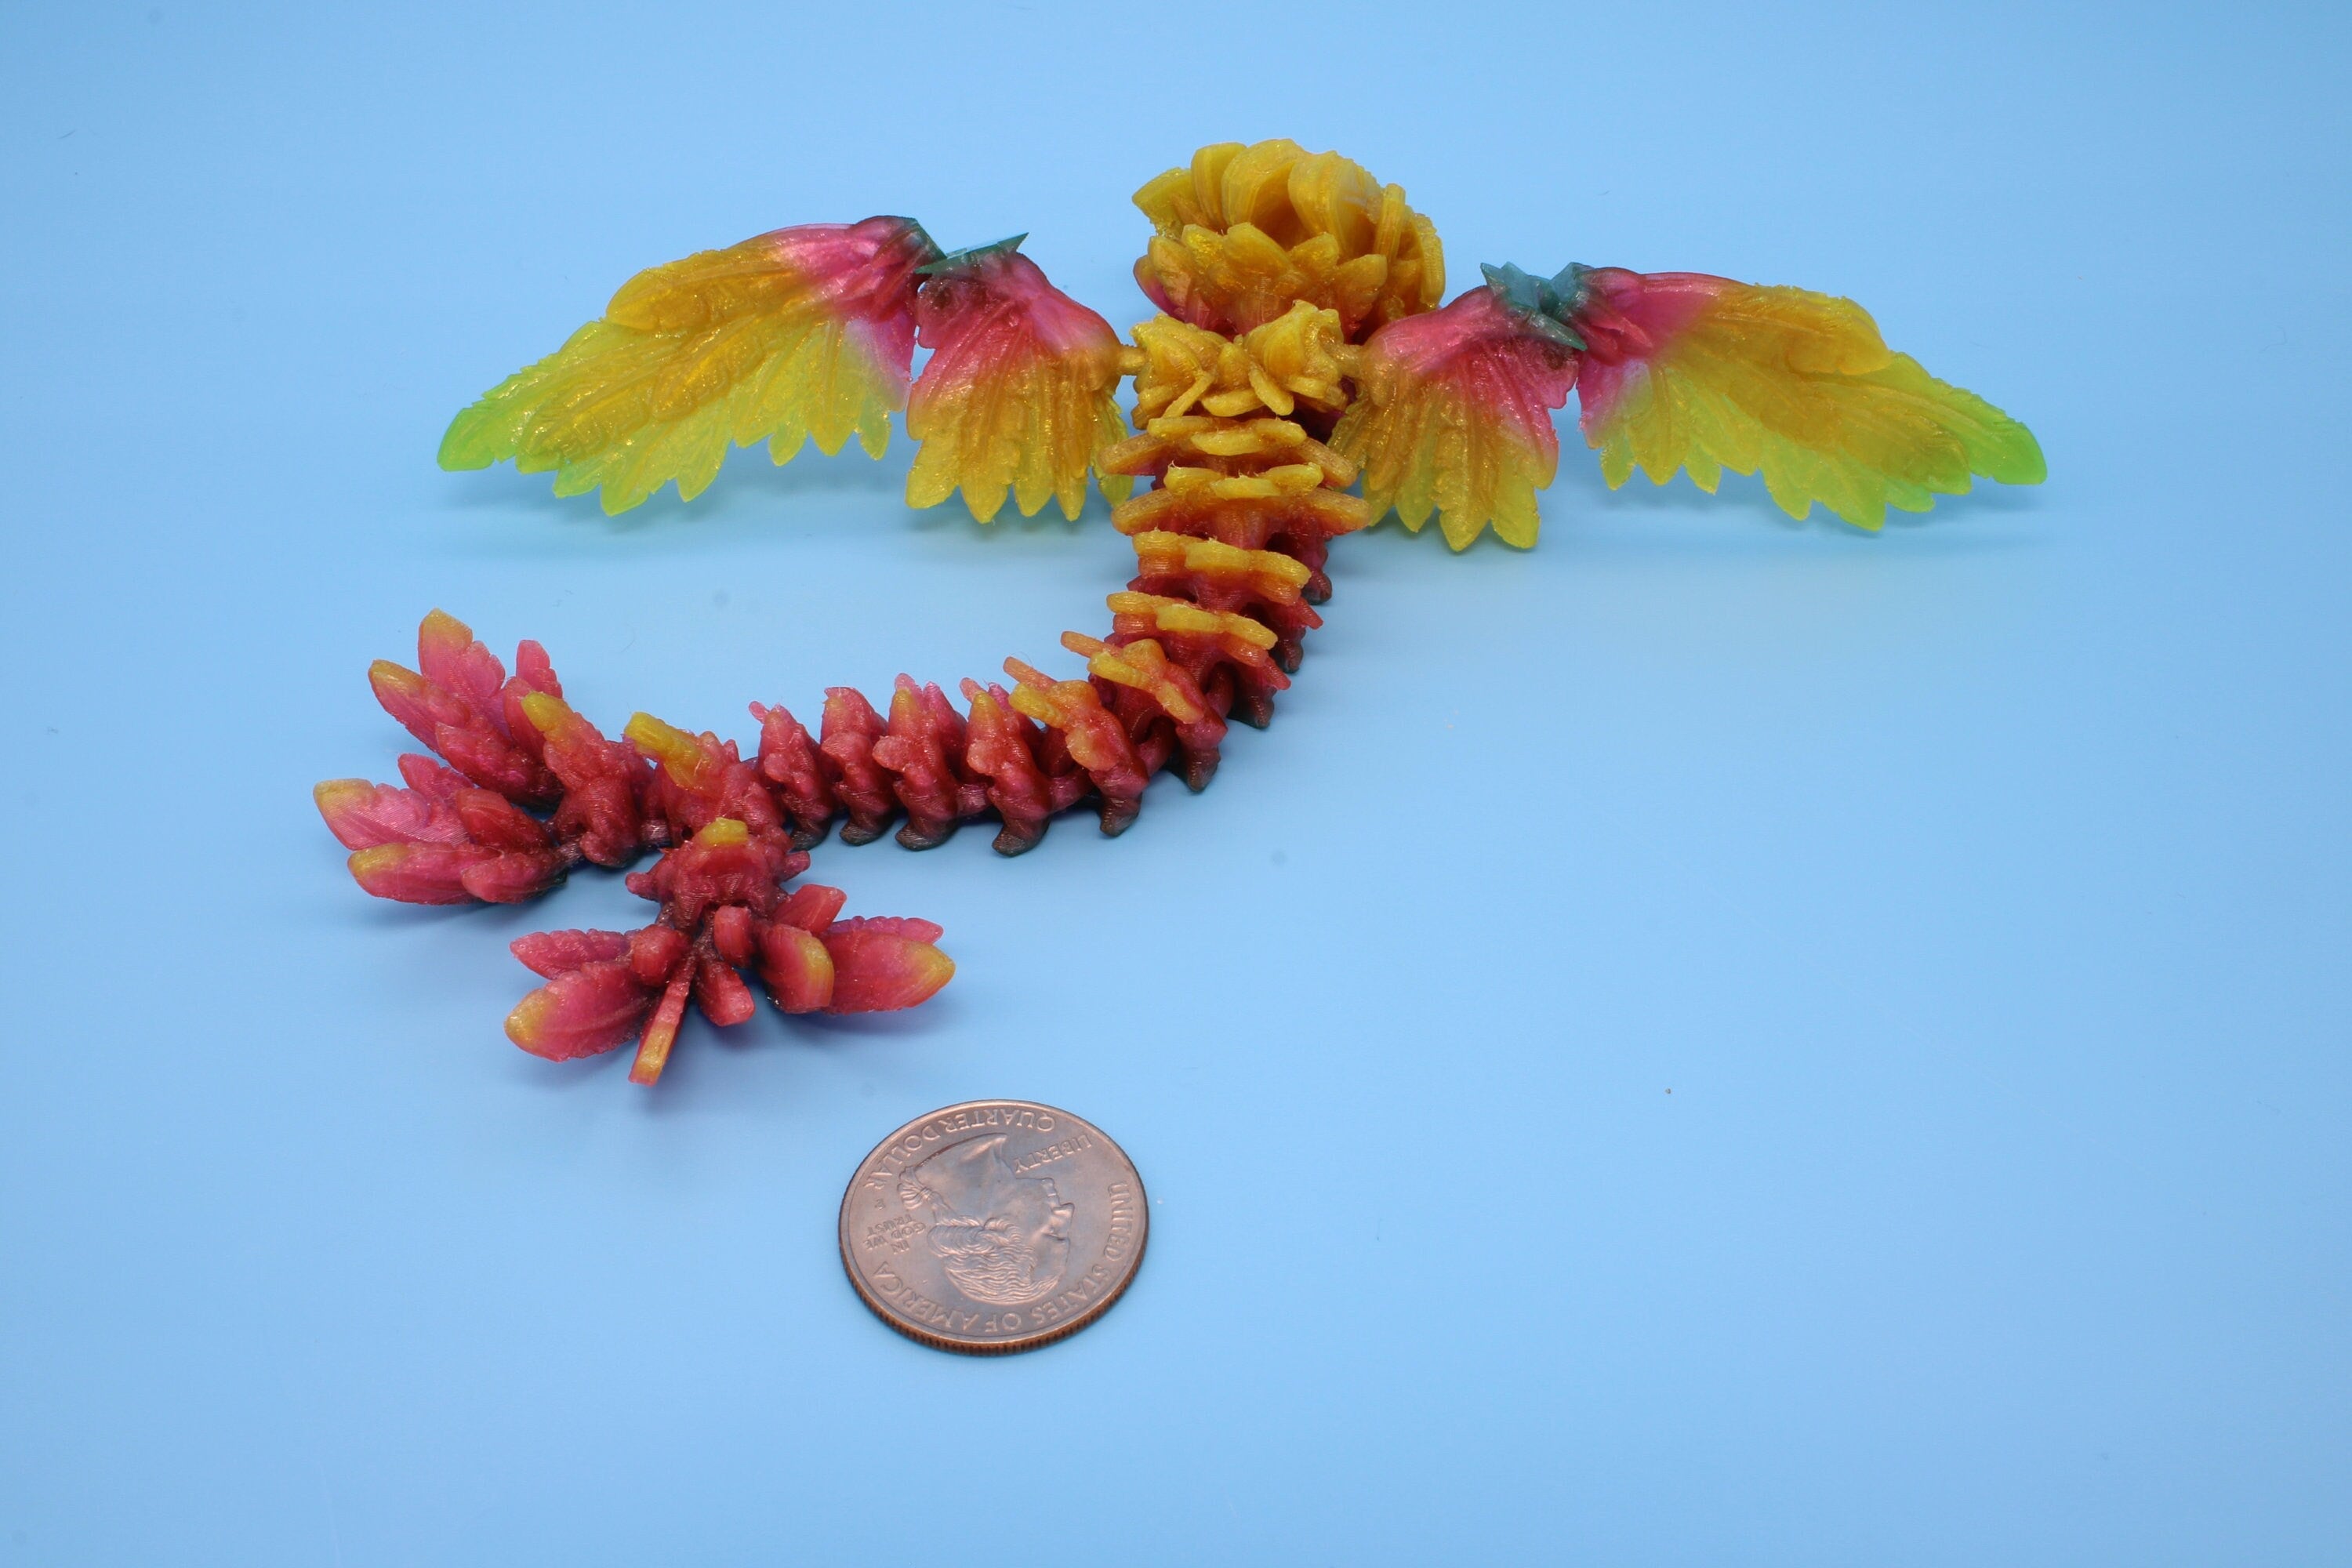 Miniature Baby Flying Serpent Dragon Rainbow 3D printed articulating Toy Fidget Flexi Toy 7 in. head to tail Stress Relief Gift